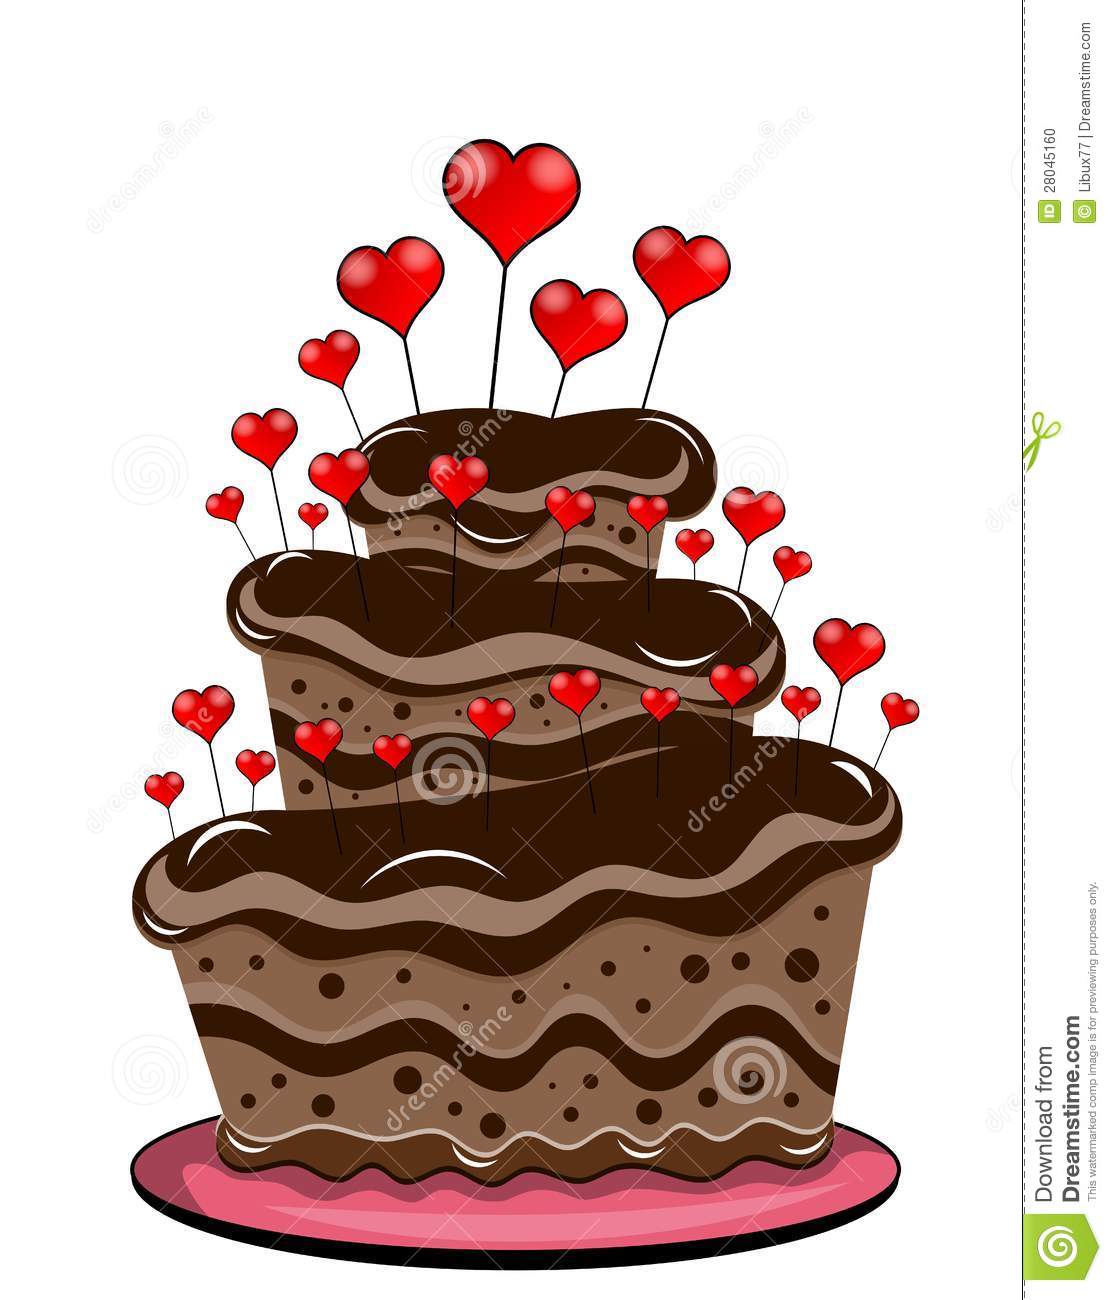 Illustration Featuring A Multilayer Chocolate Cake Decorated With